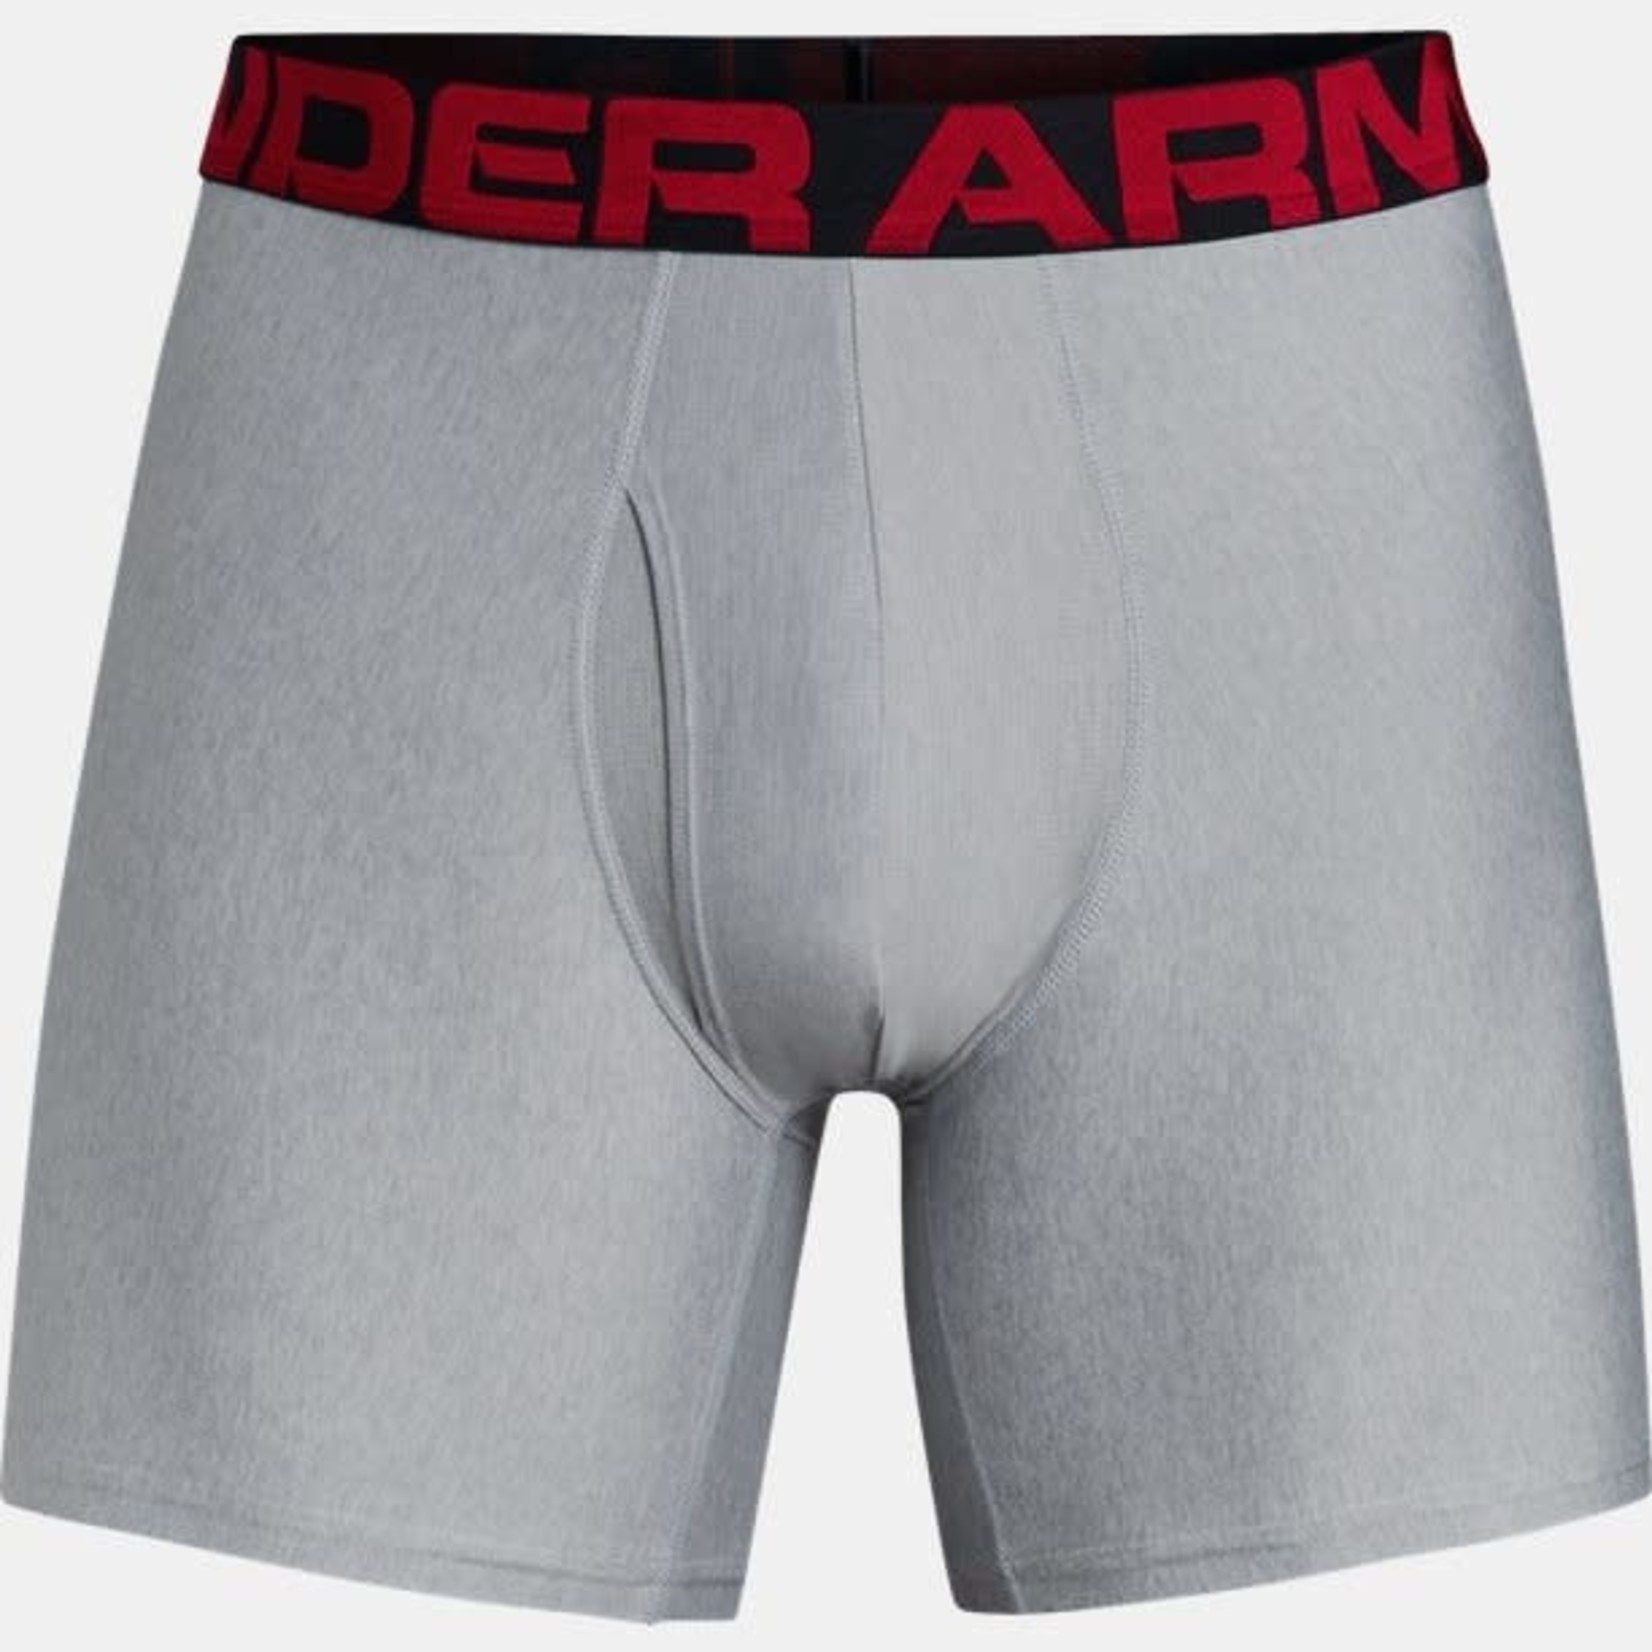 Under Armour UA Tech 6inch Boxers 2 Pack - grey